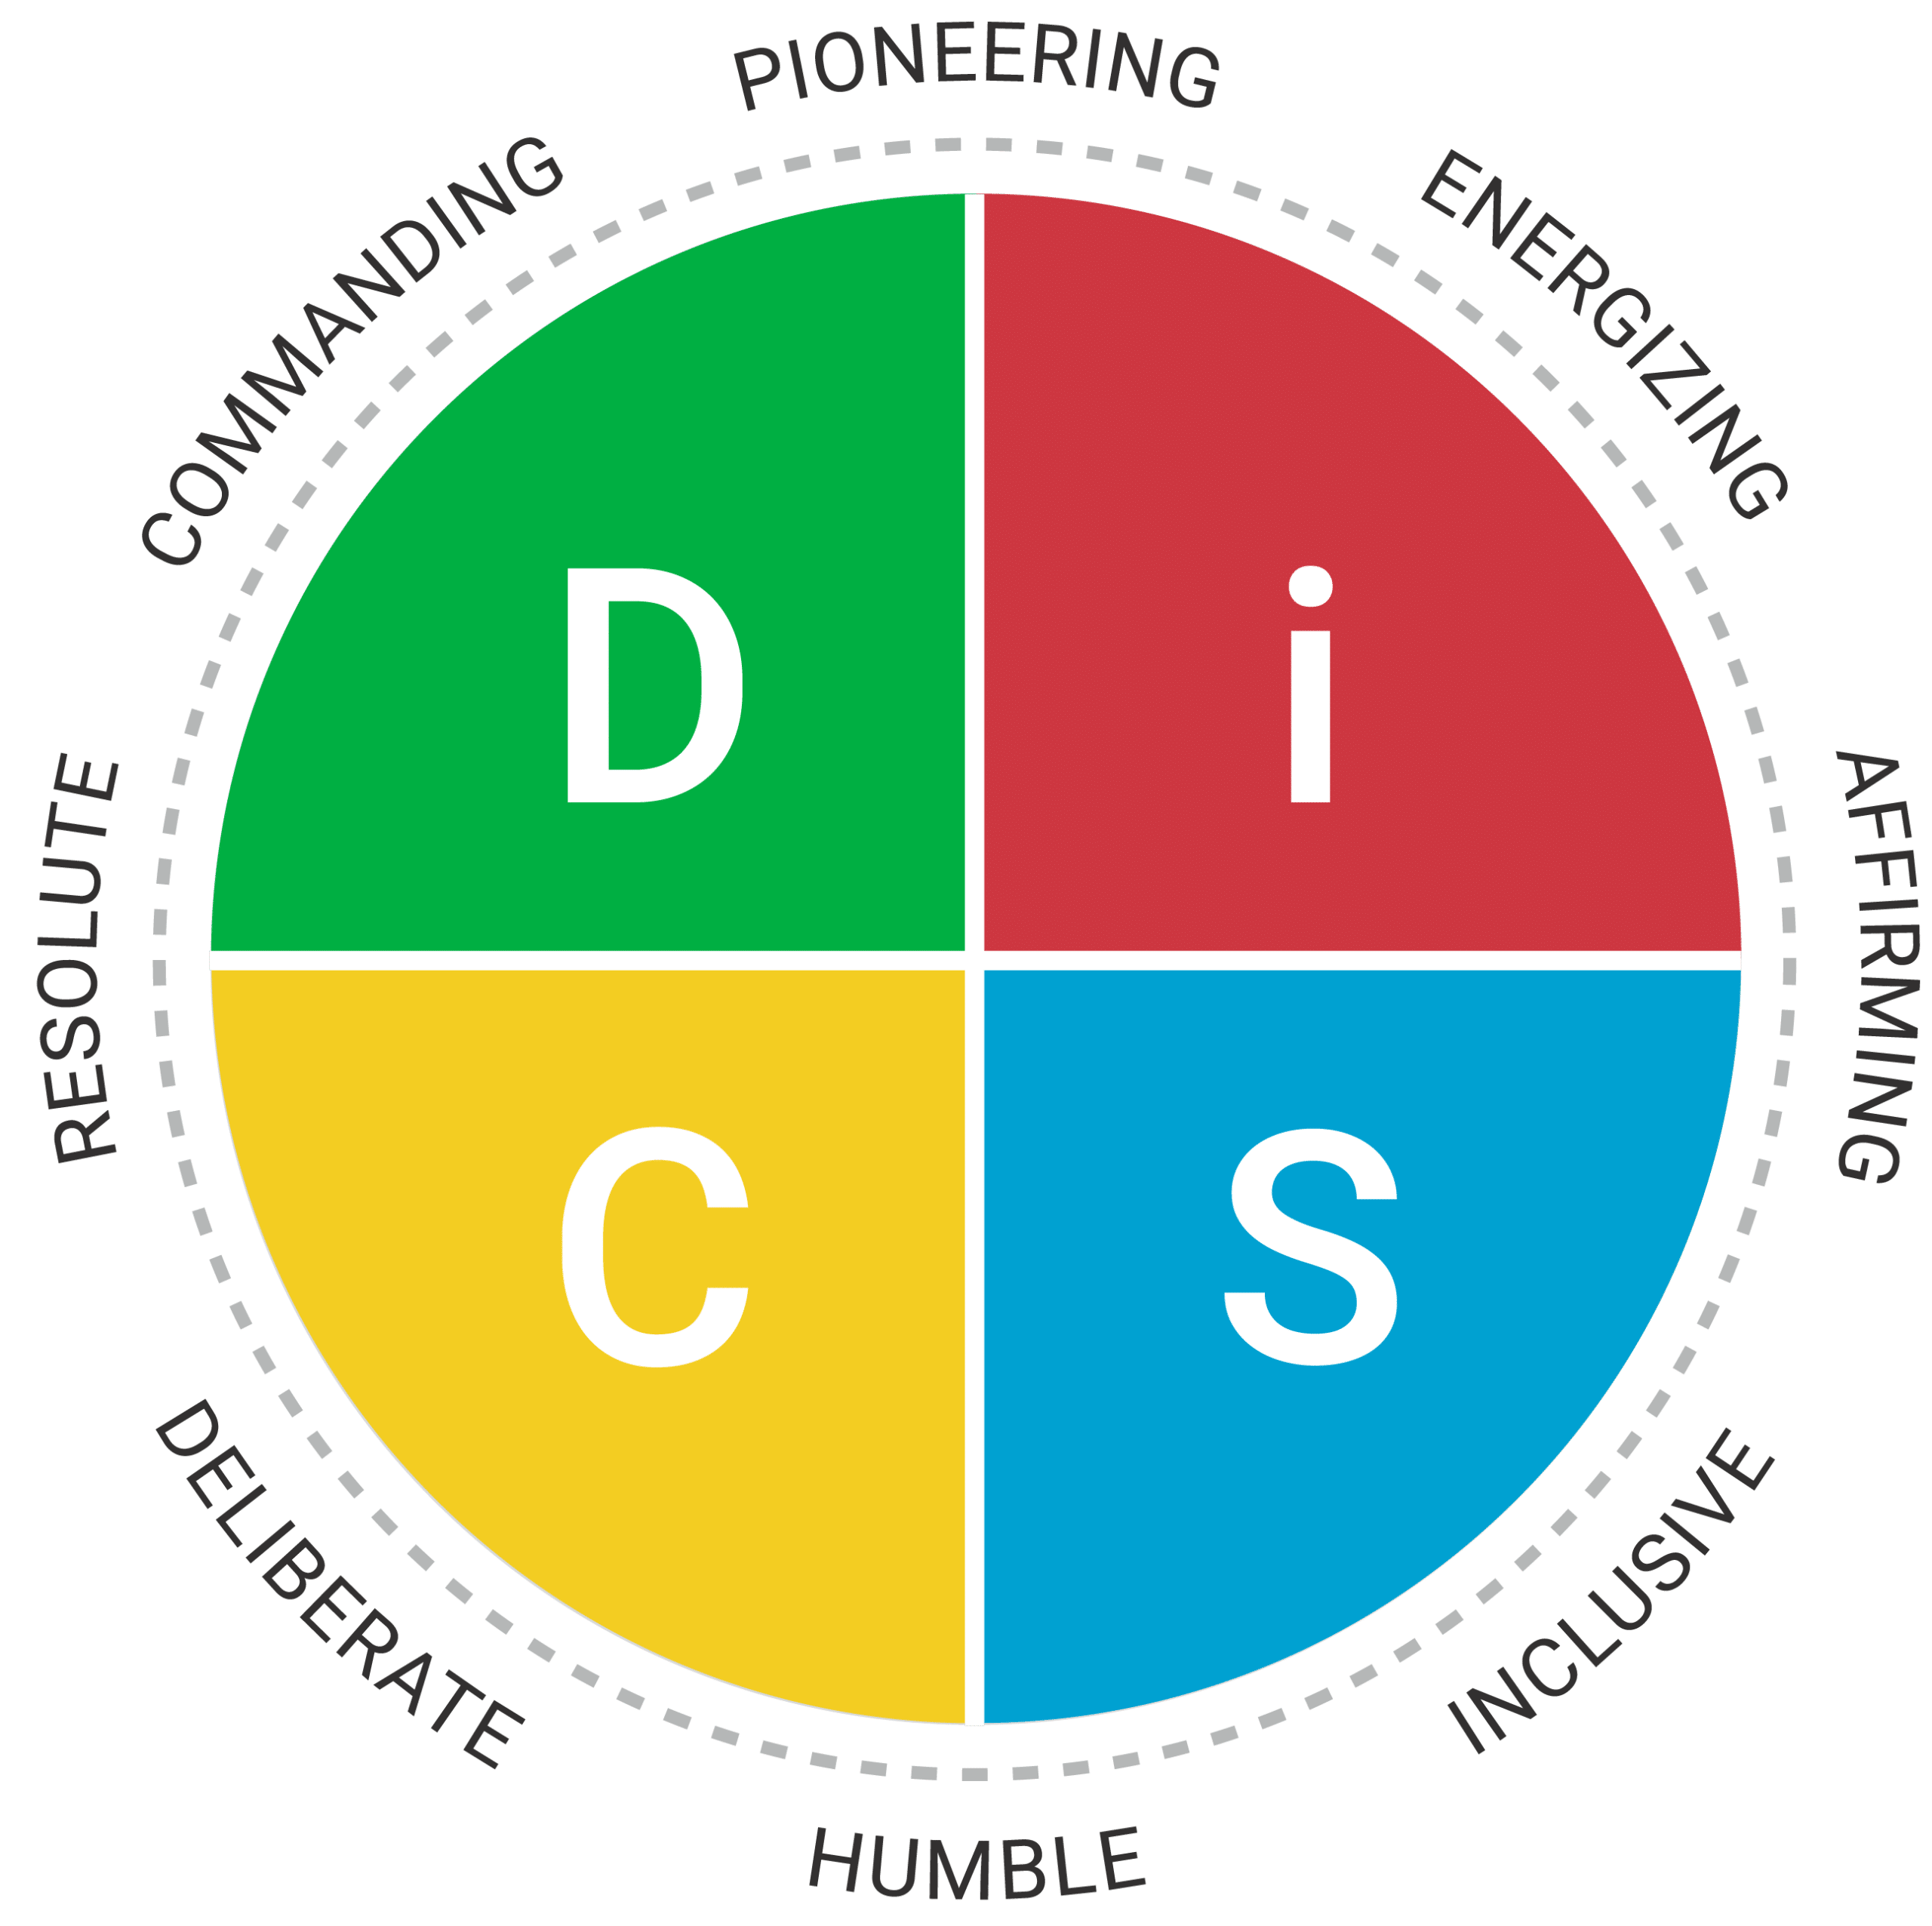 Everything DiSC Work of Leaders map